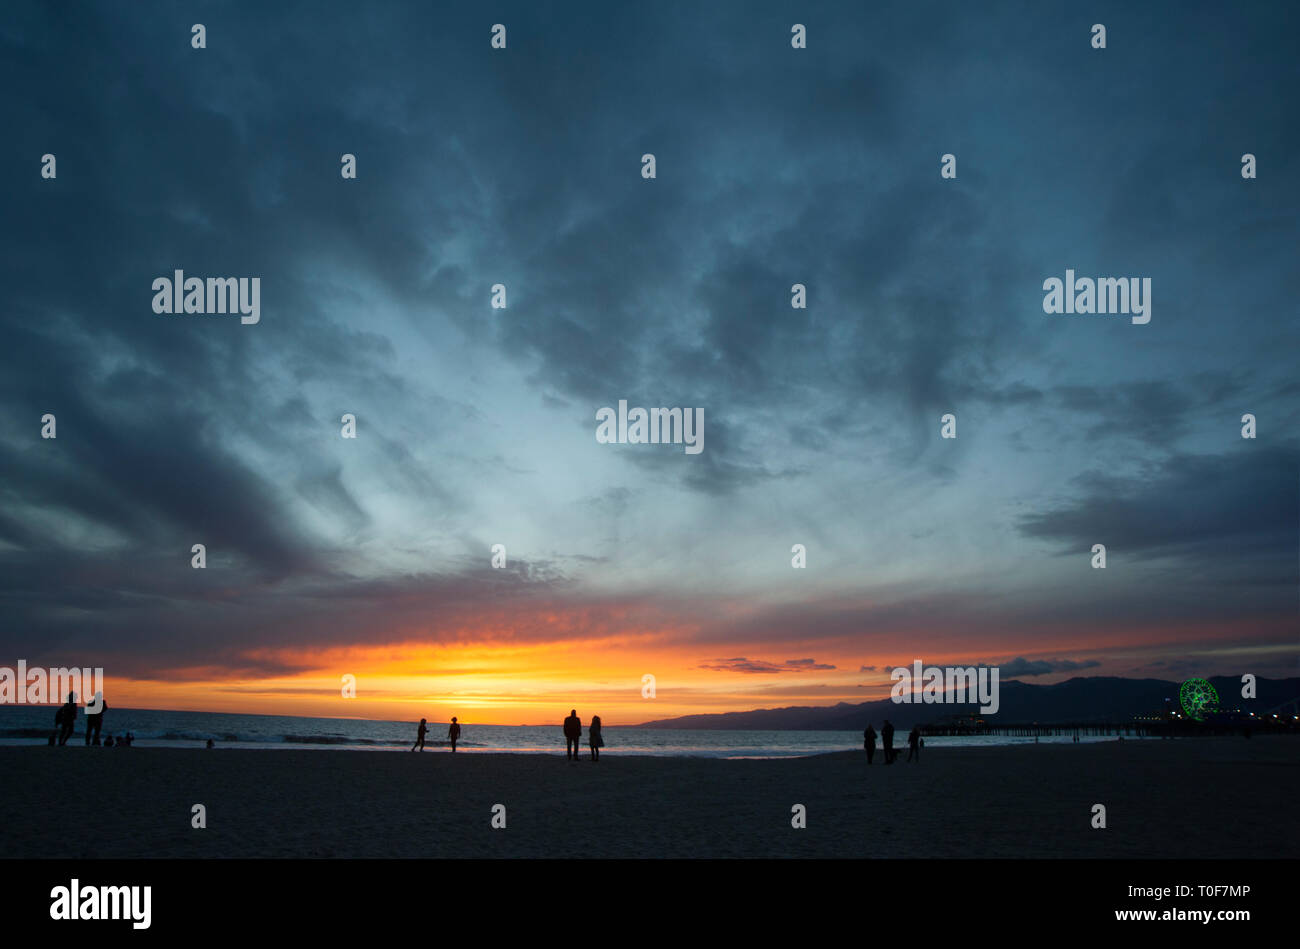 People watching the sunset at Santa Monica Beach in Los Angeles, CA Stock Photo